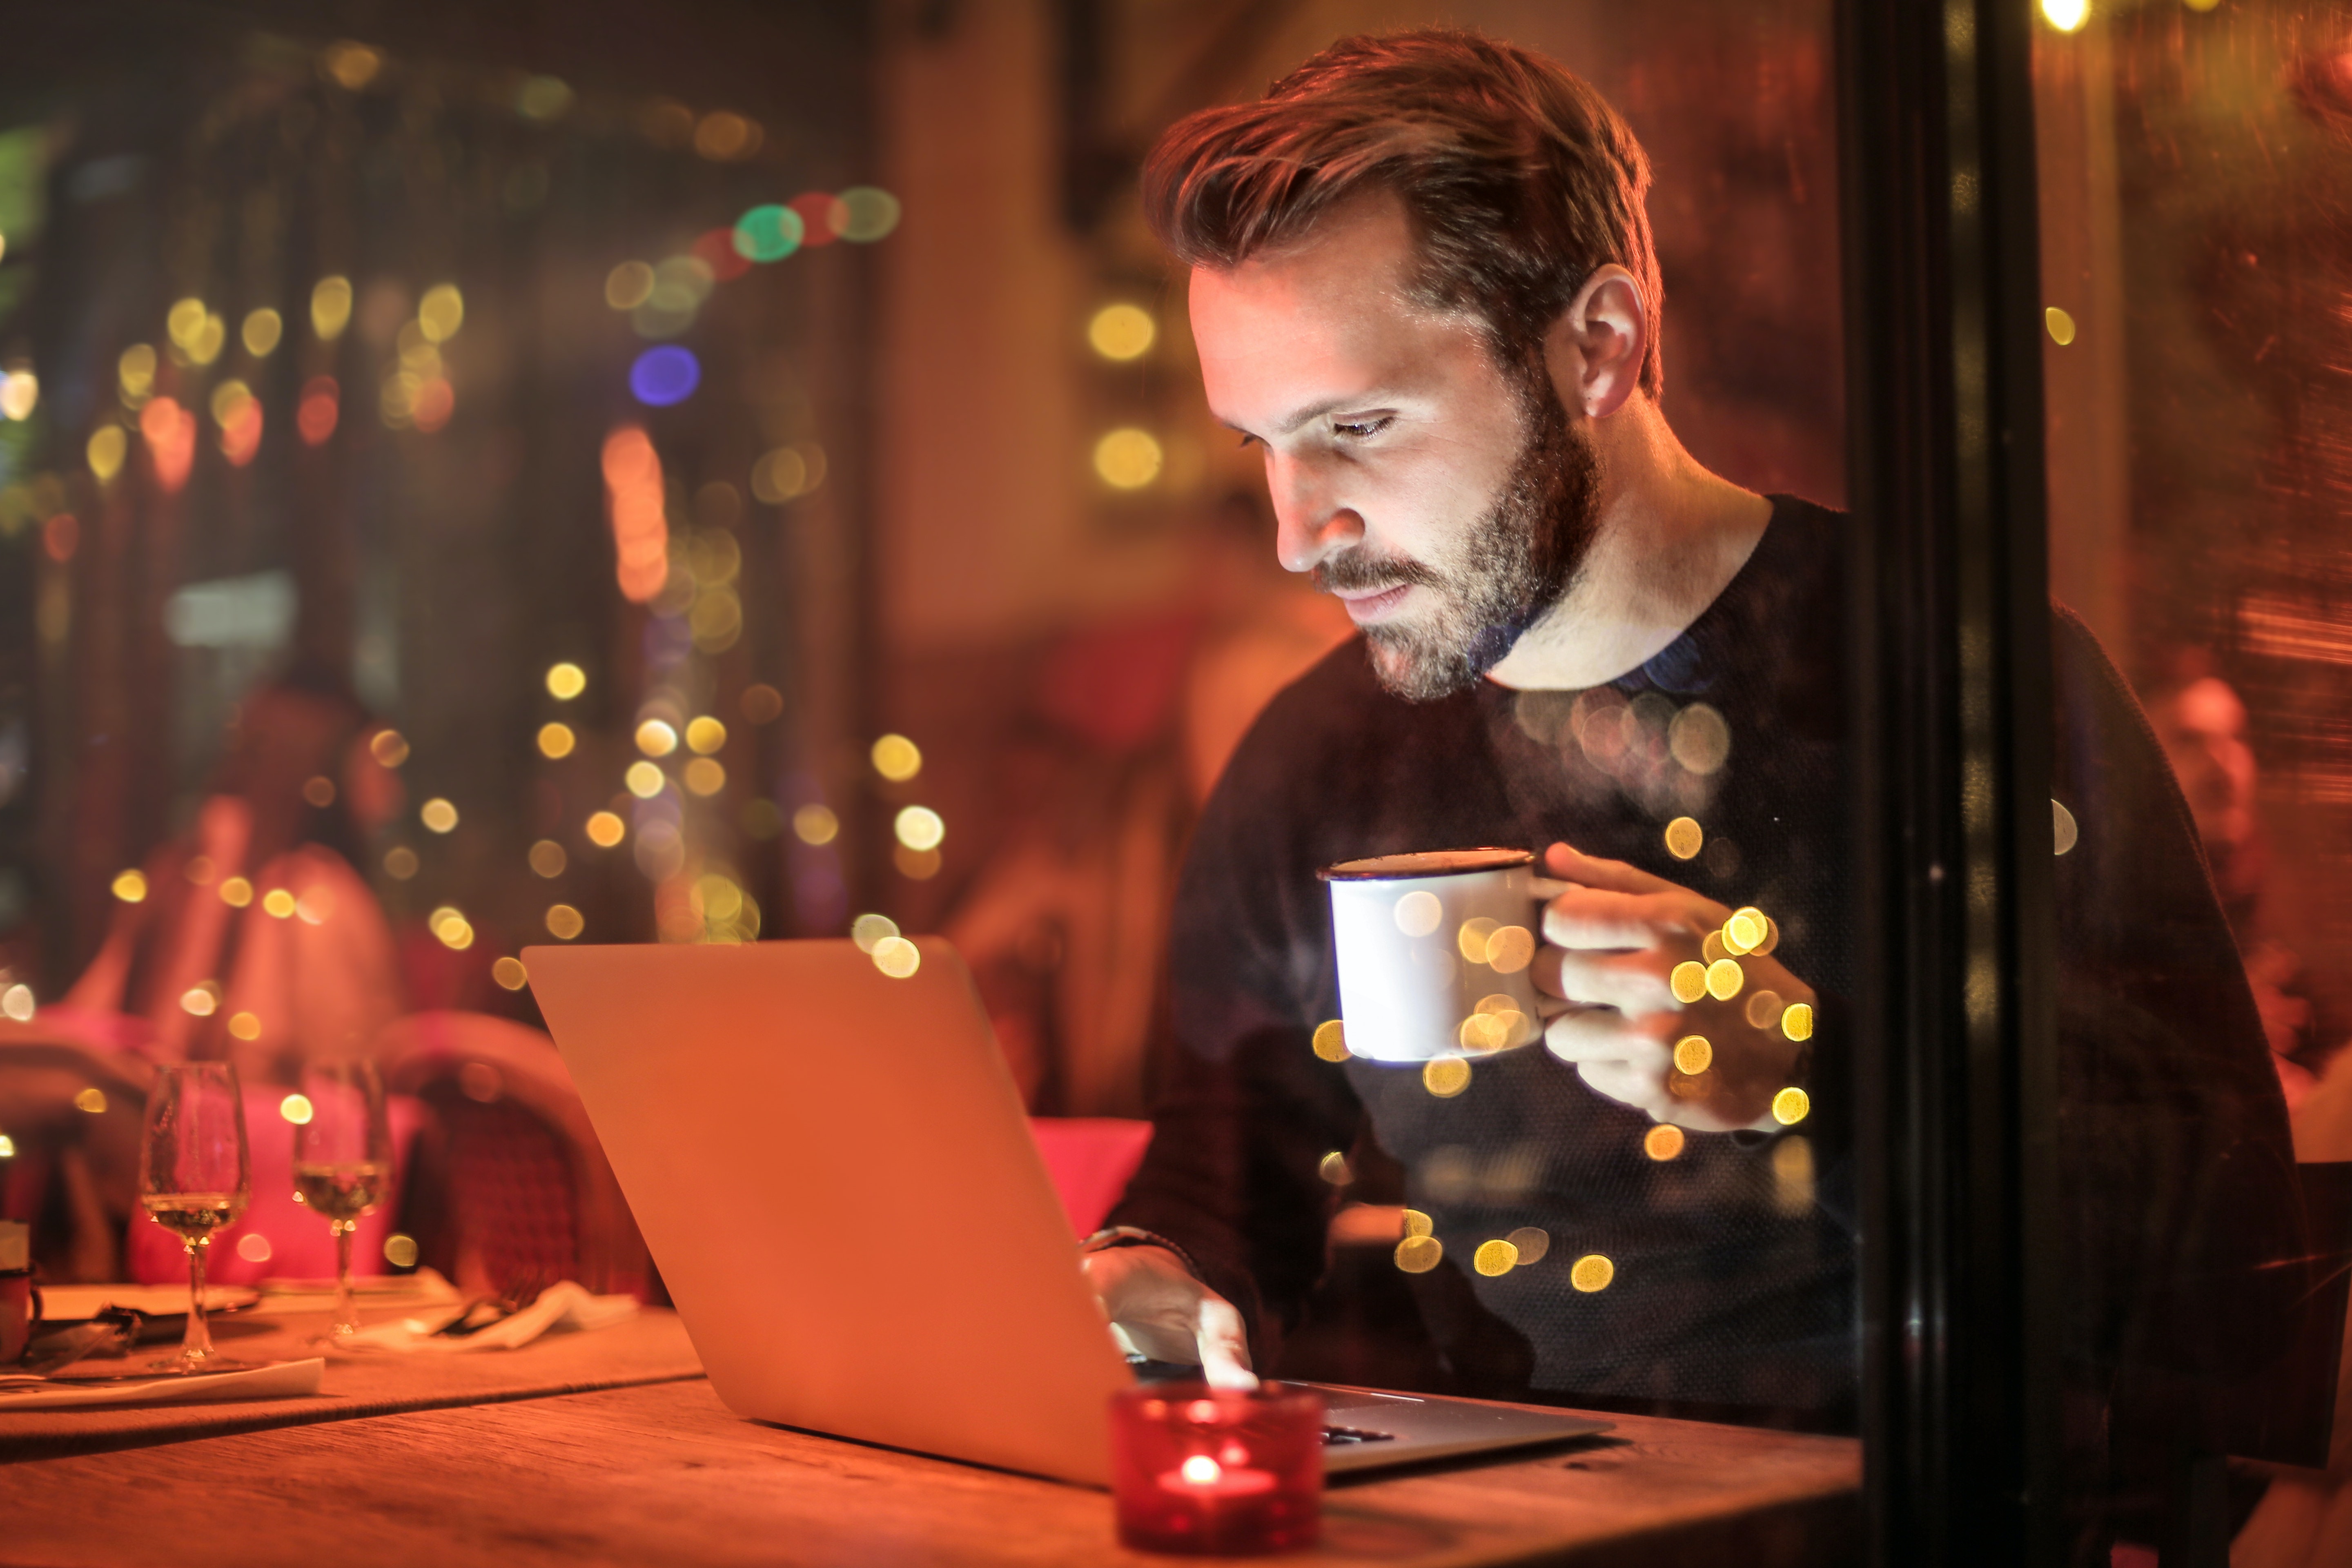 Man in a black sweater holding a cup of coffee and staring down at his computer.